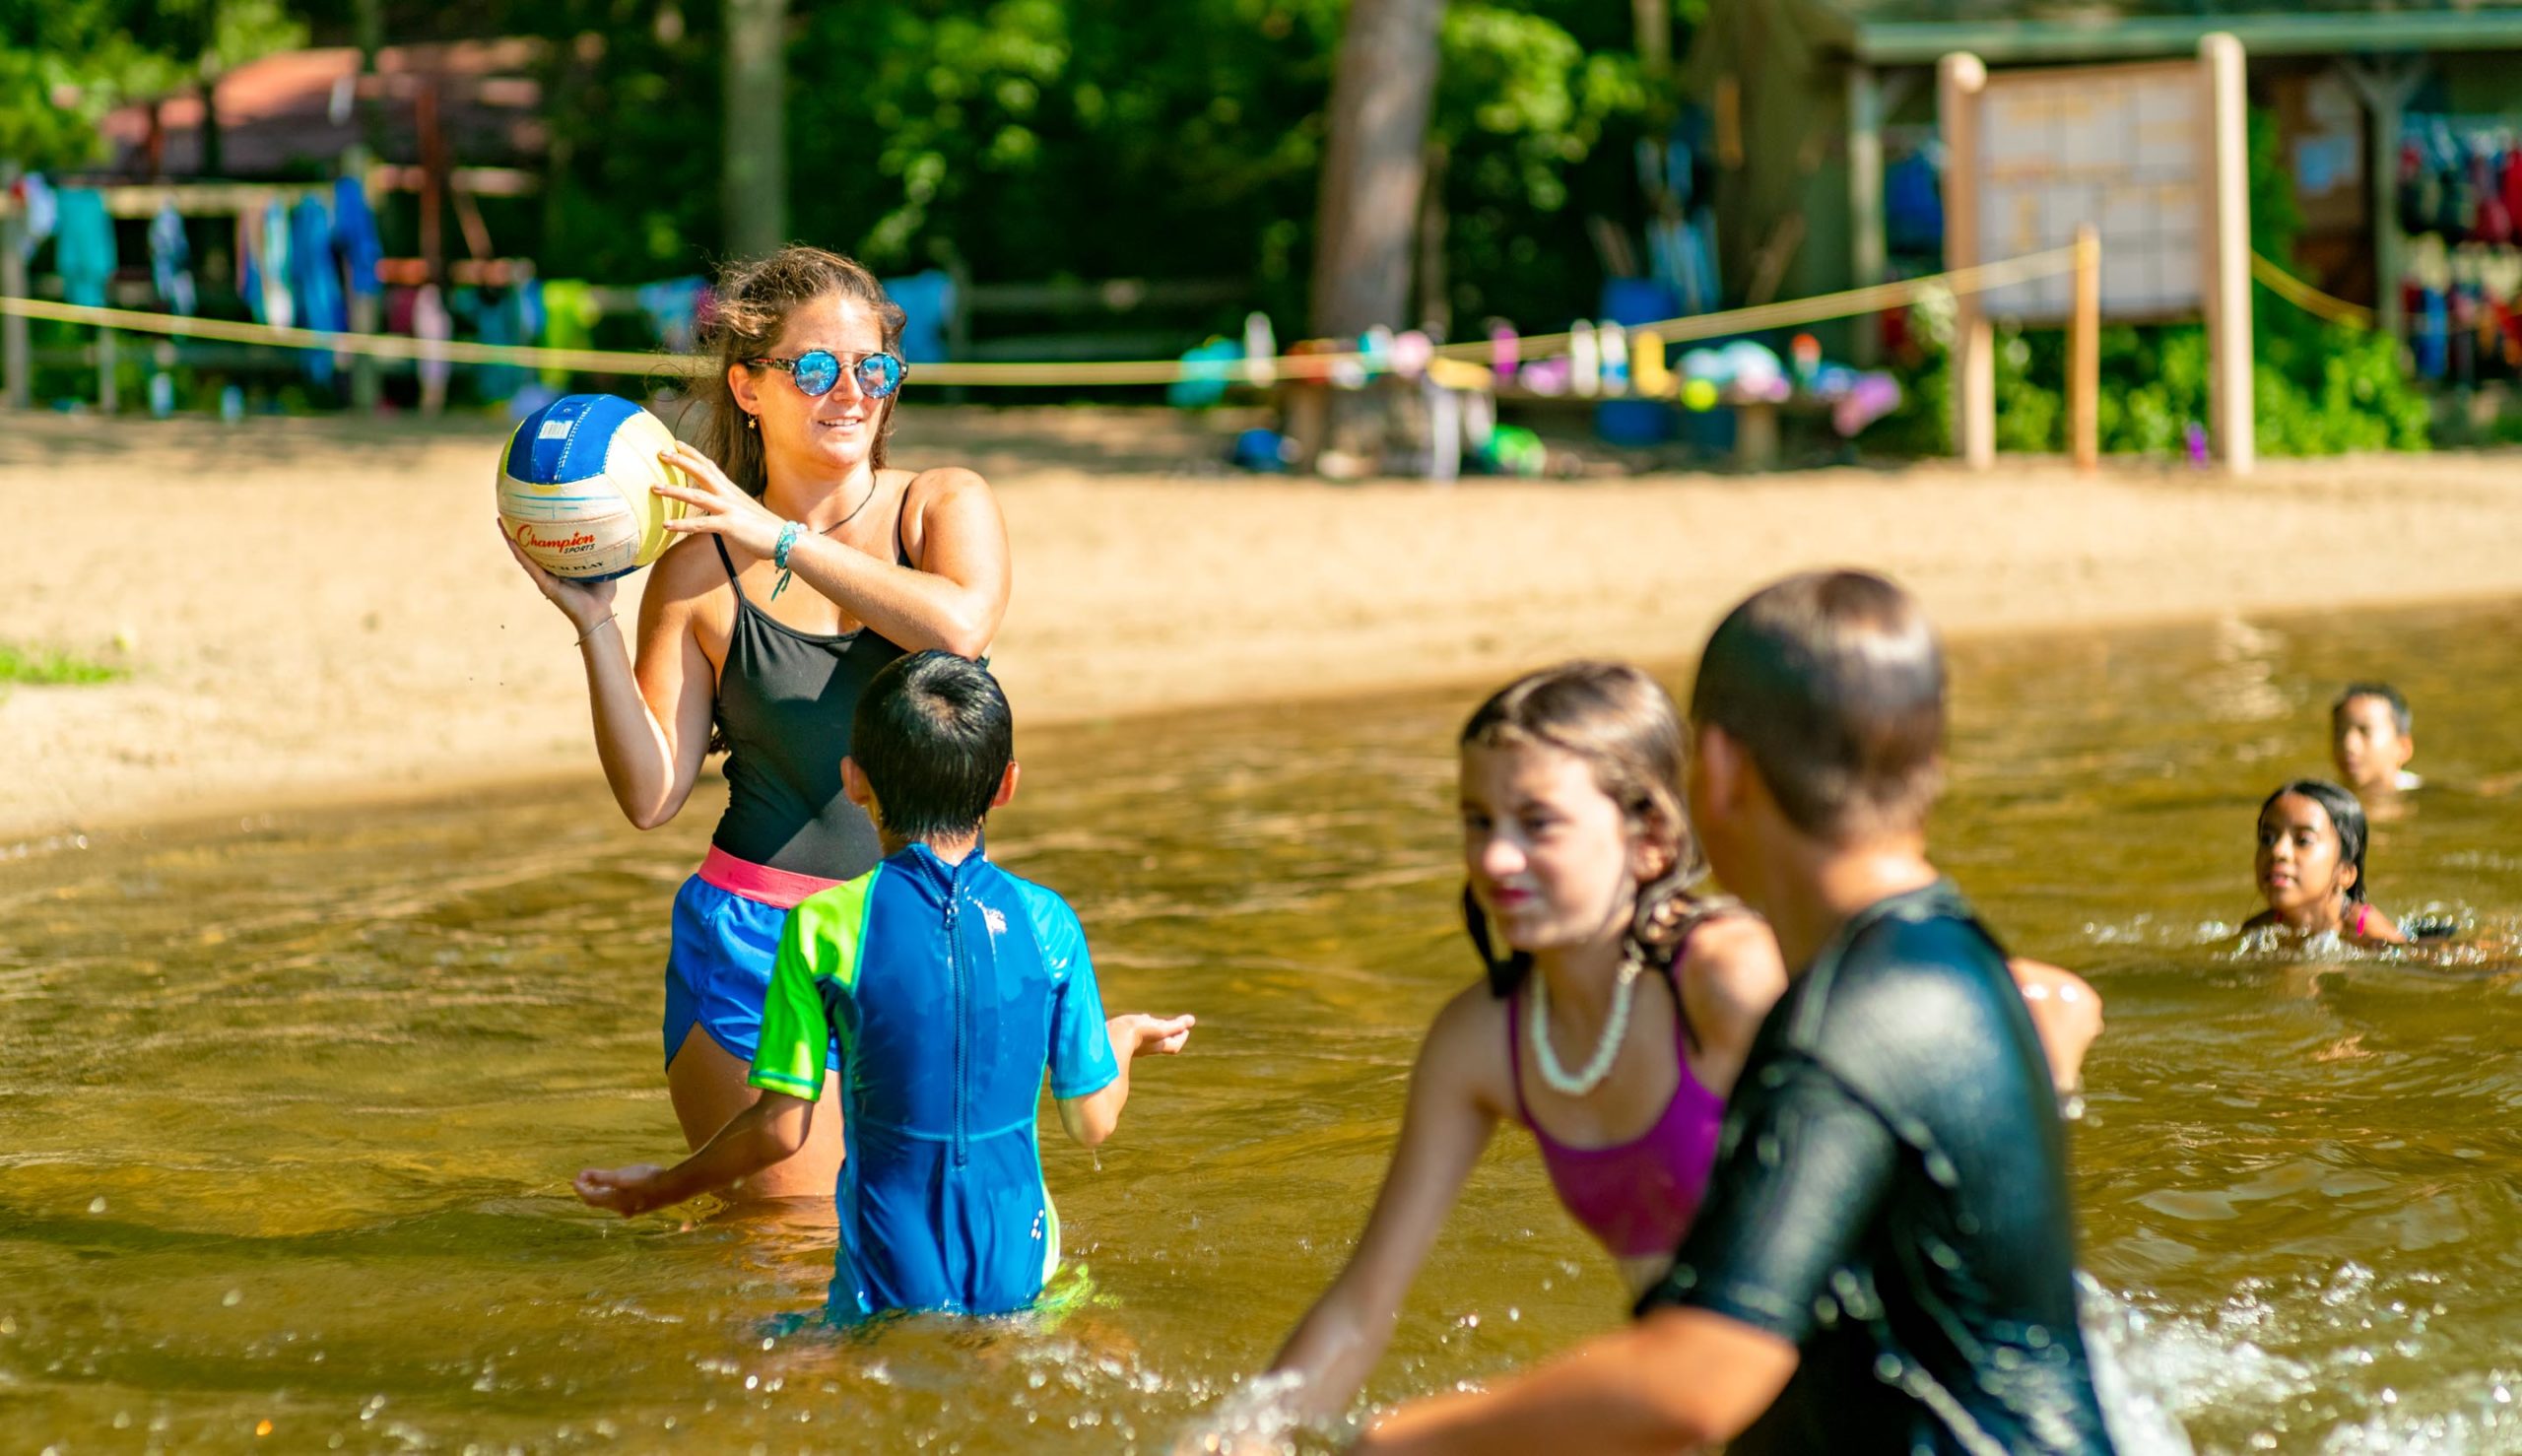 Counselor playing ball with campers in the water